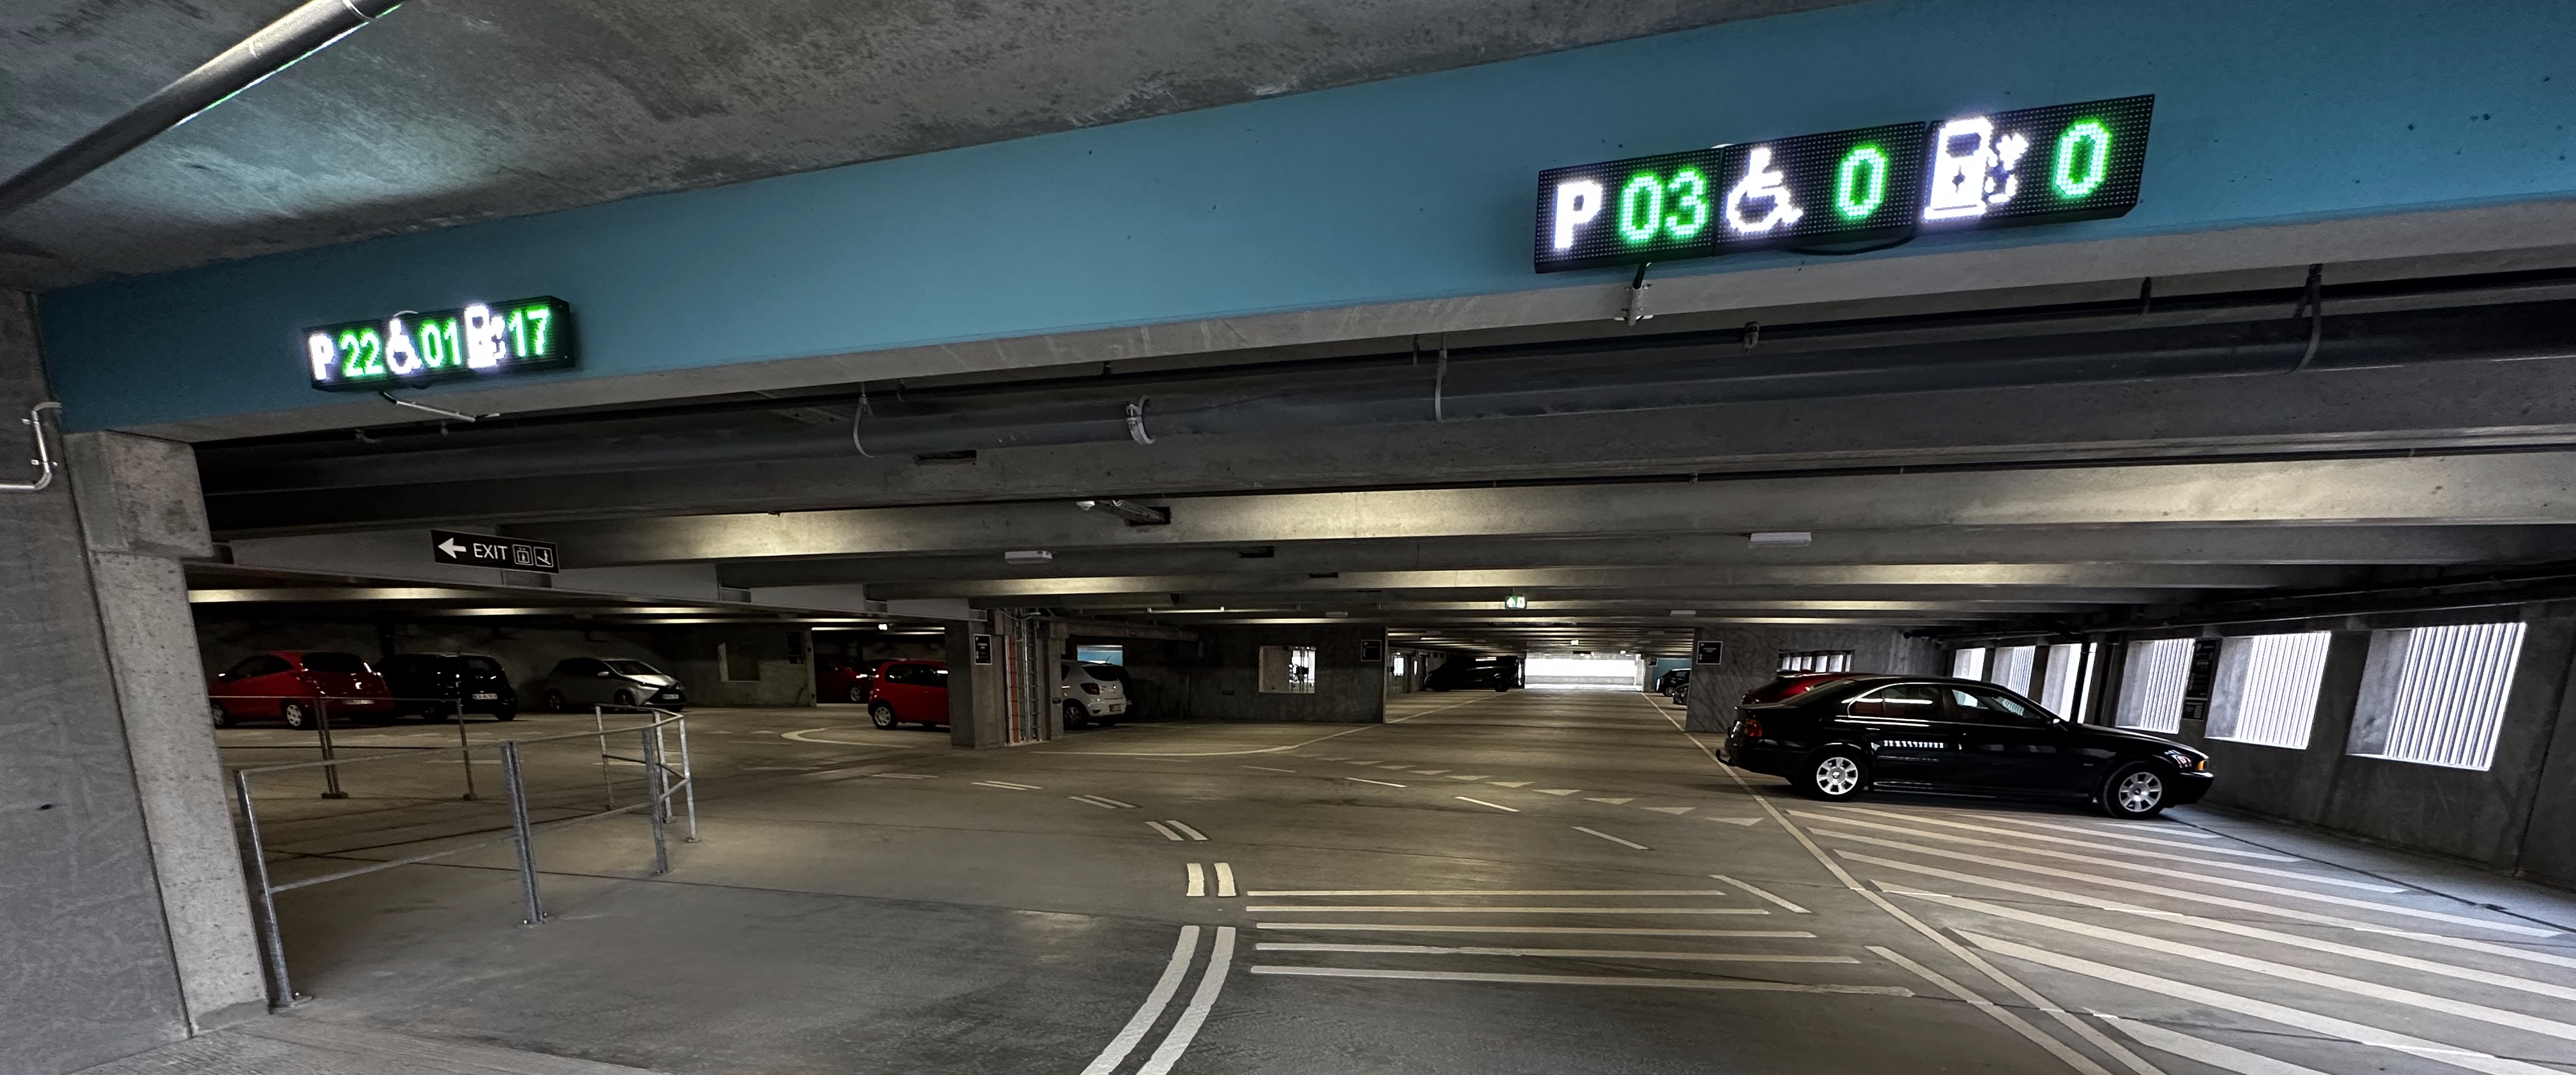 Parking Entry